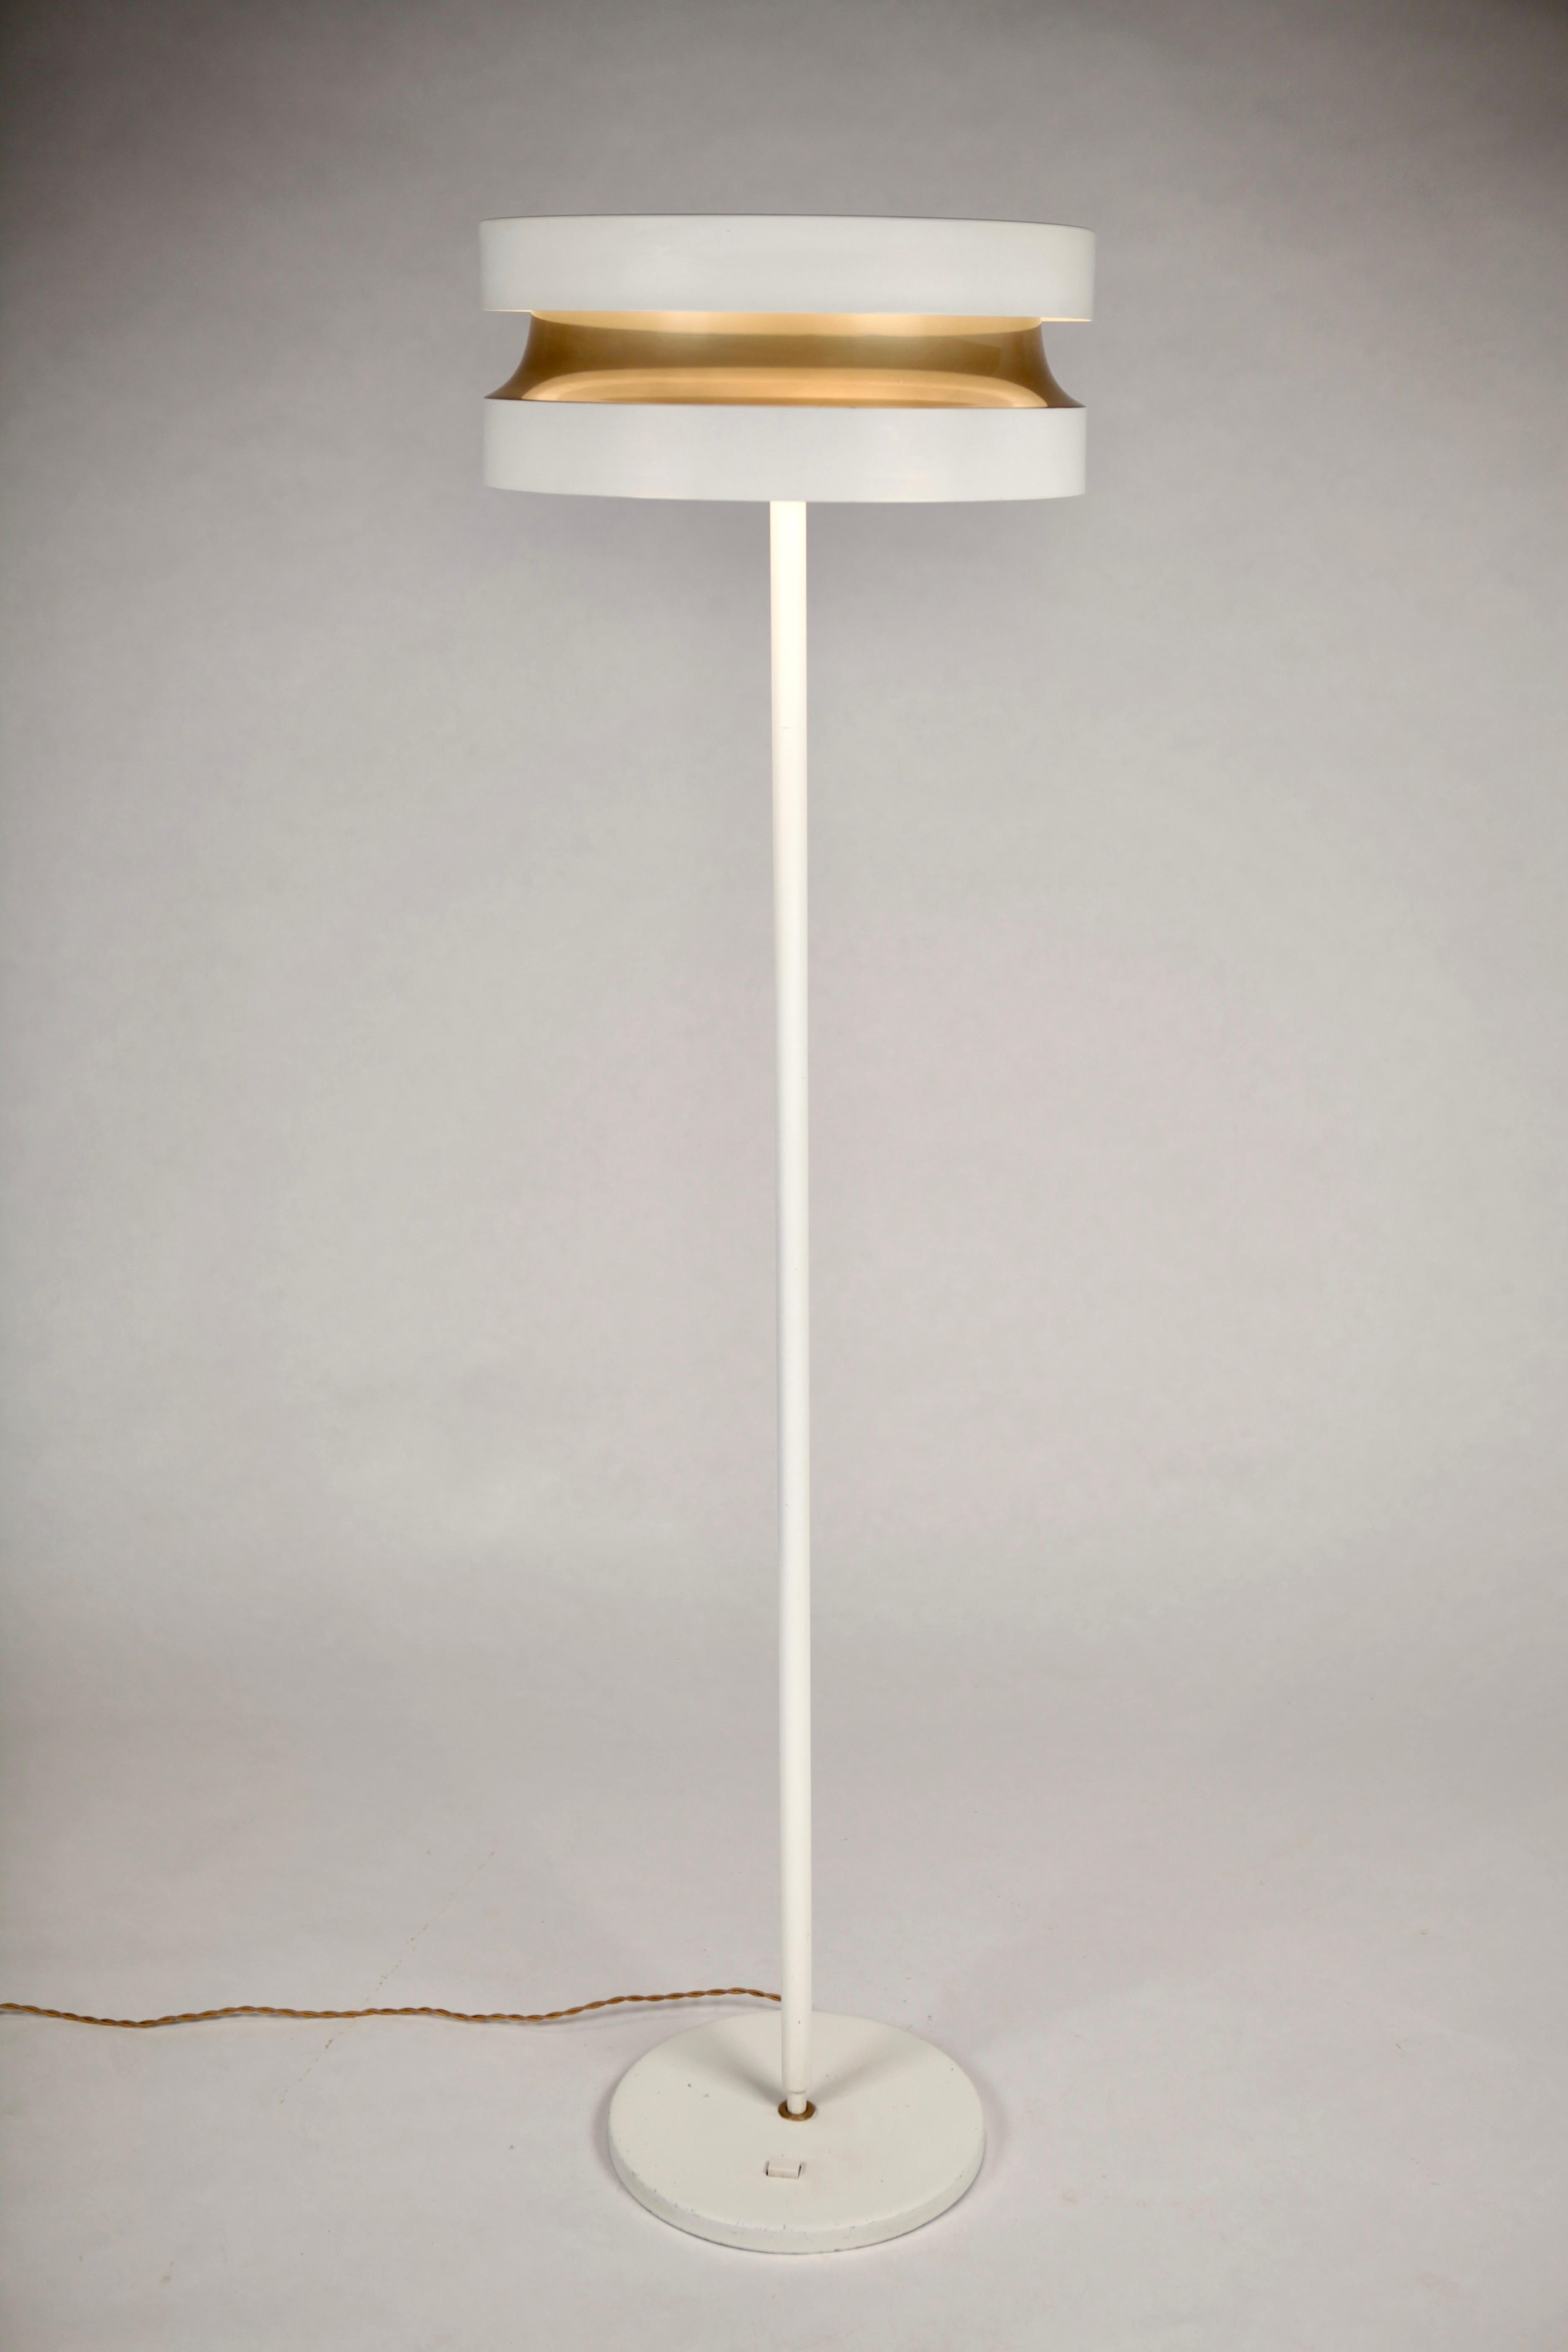 Lisa Johansson-Pape, floor lamp in painted metal and brass details, manufactured by Stockman, Orno, Finland in the 1960s.
Adjustable height max. 195cm. 3 E 27 sockets.
Rewired.